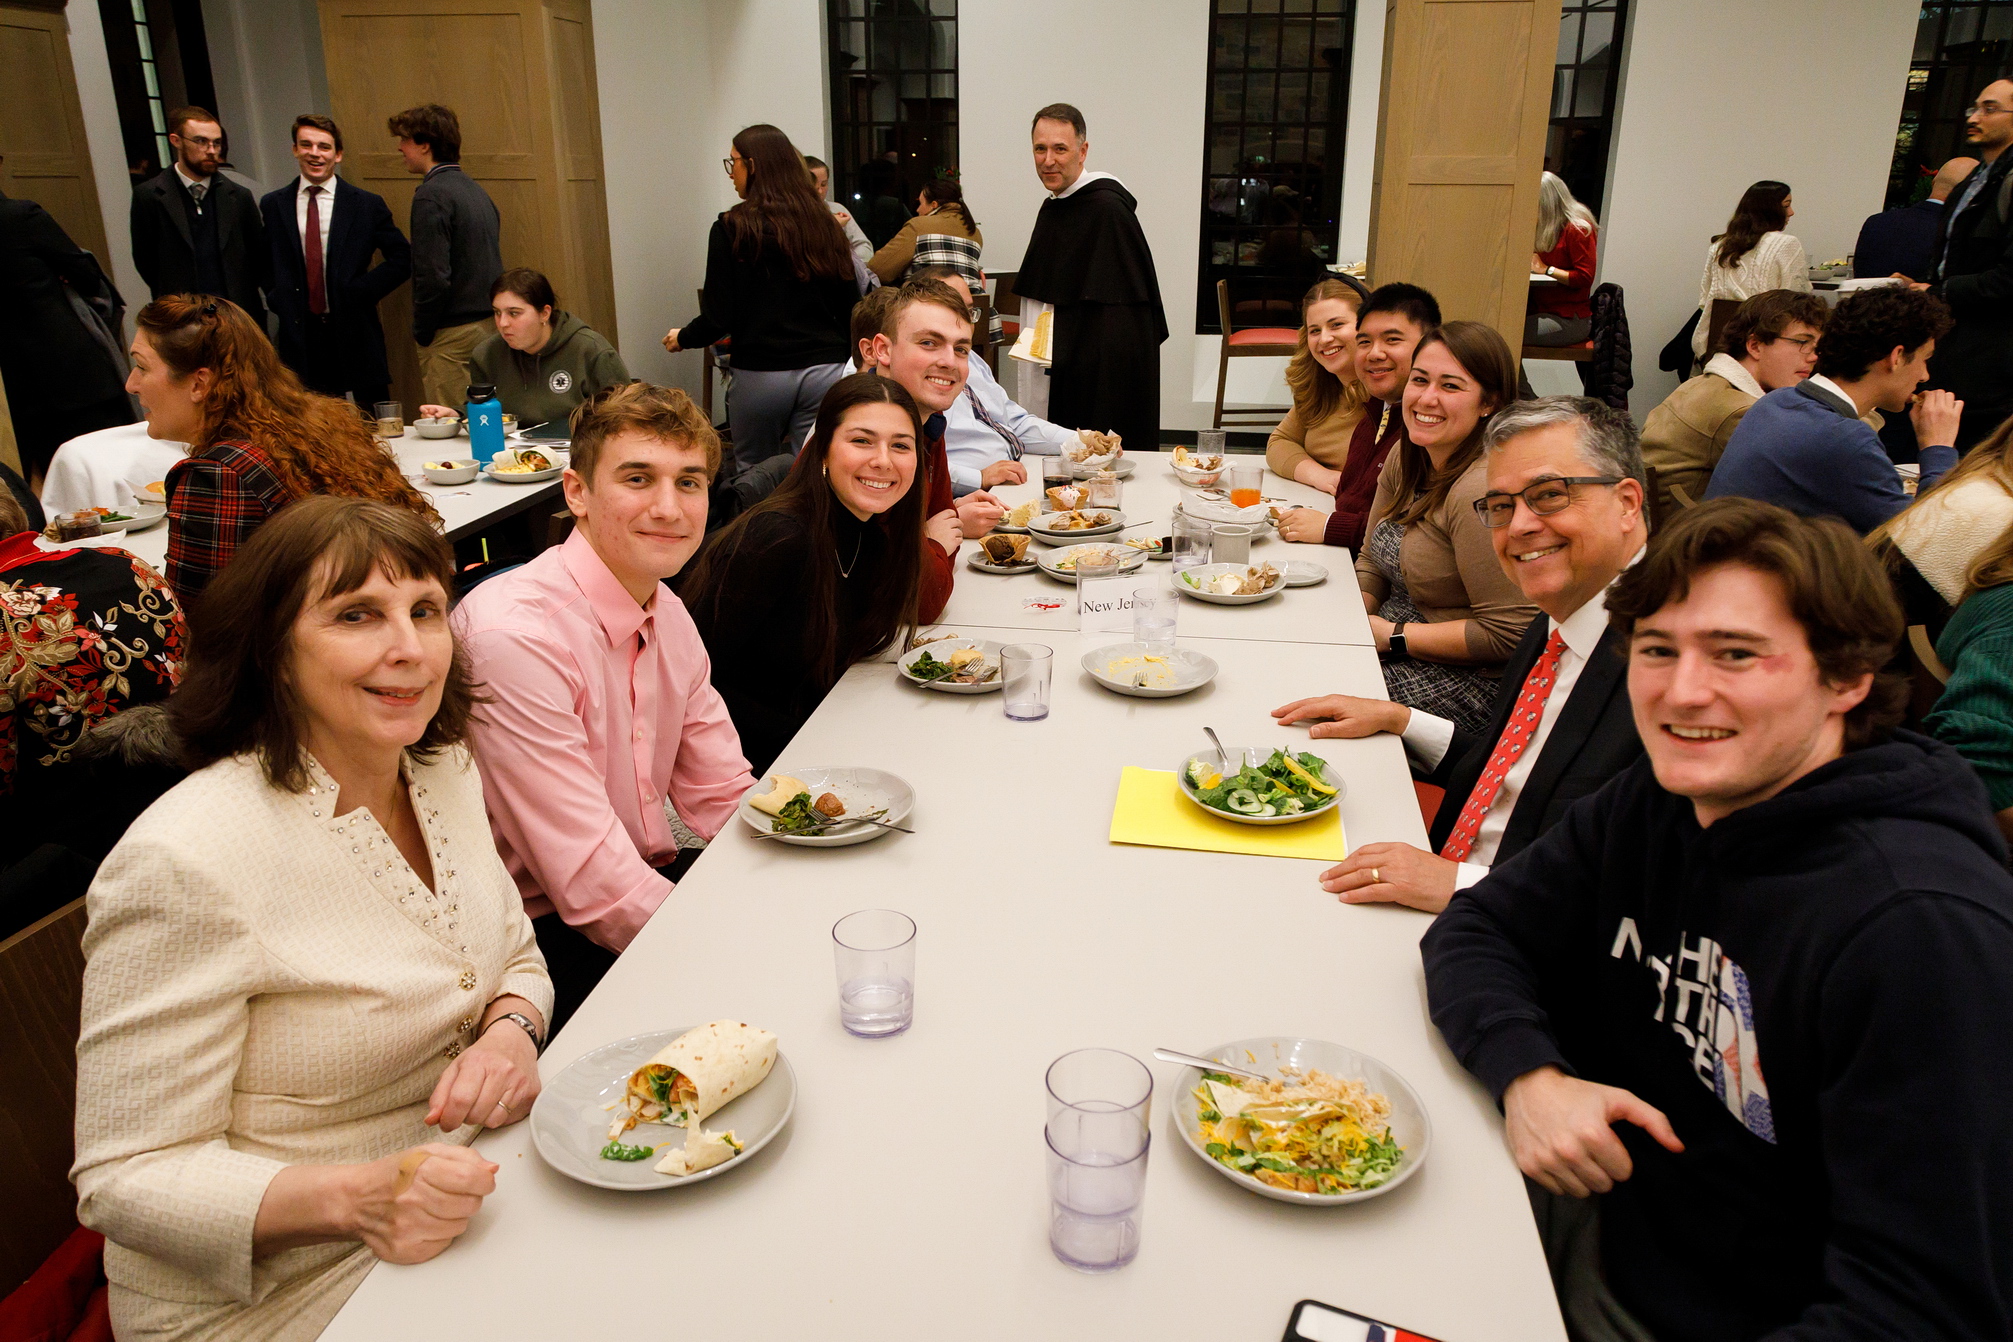 President Kilpatrick and wife Nancy eating with students